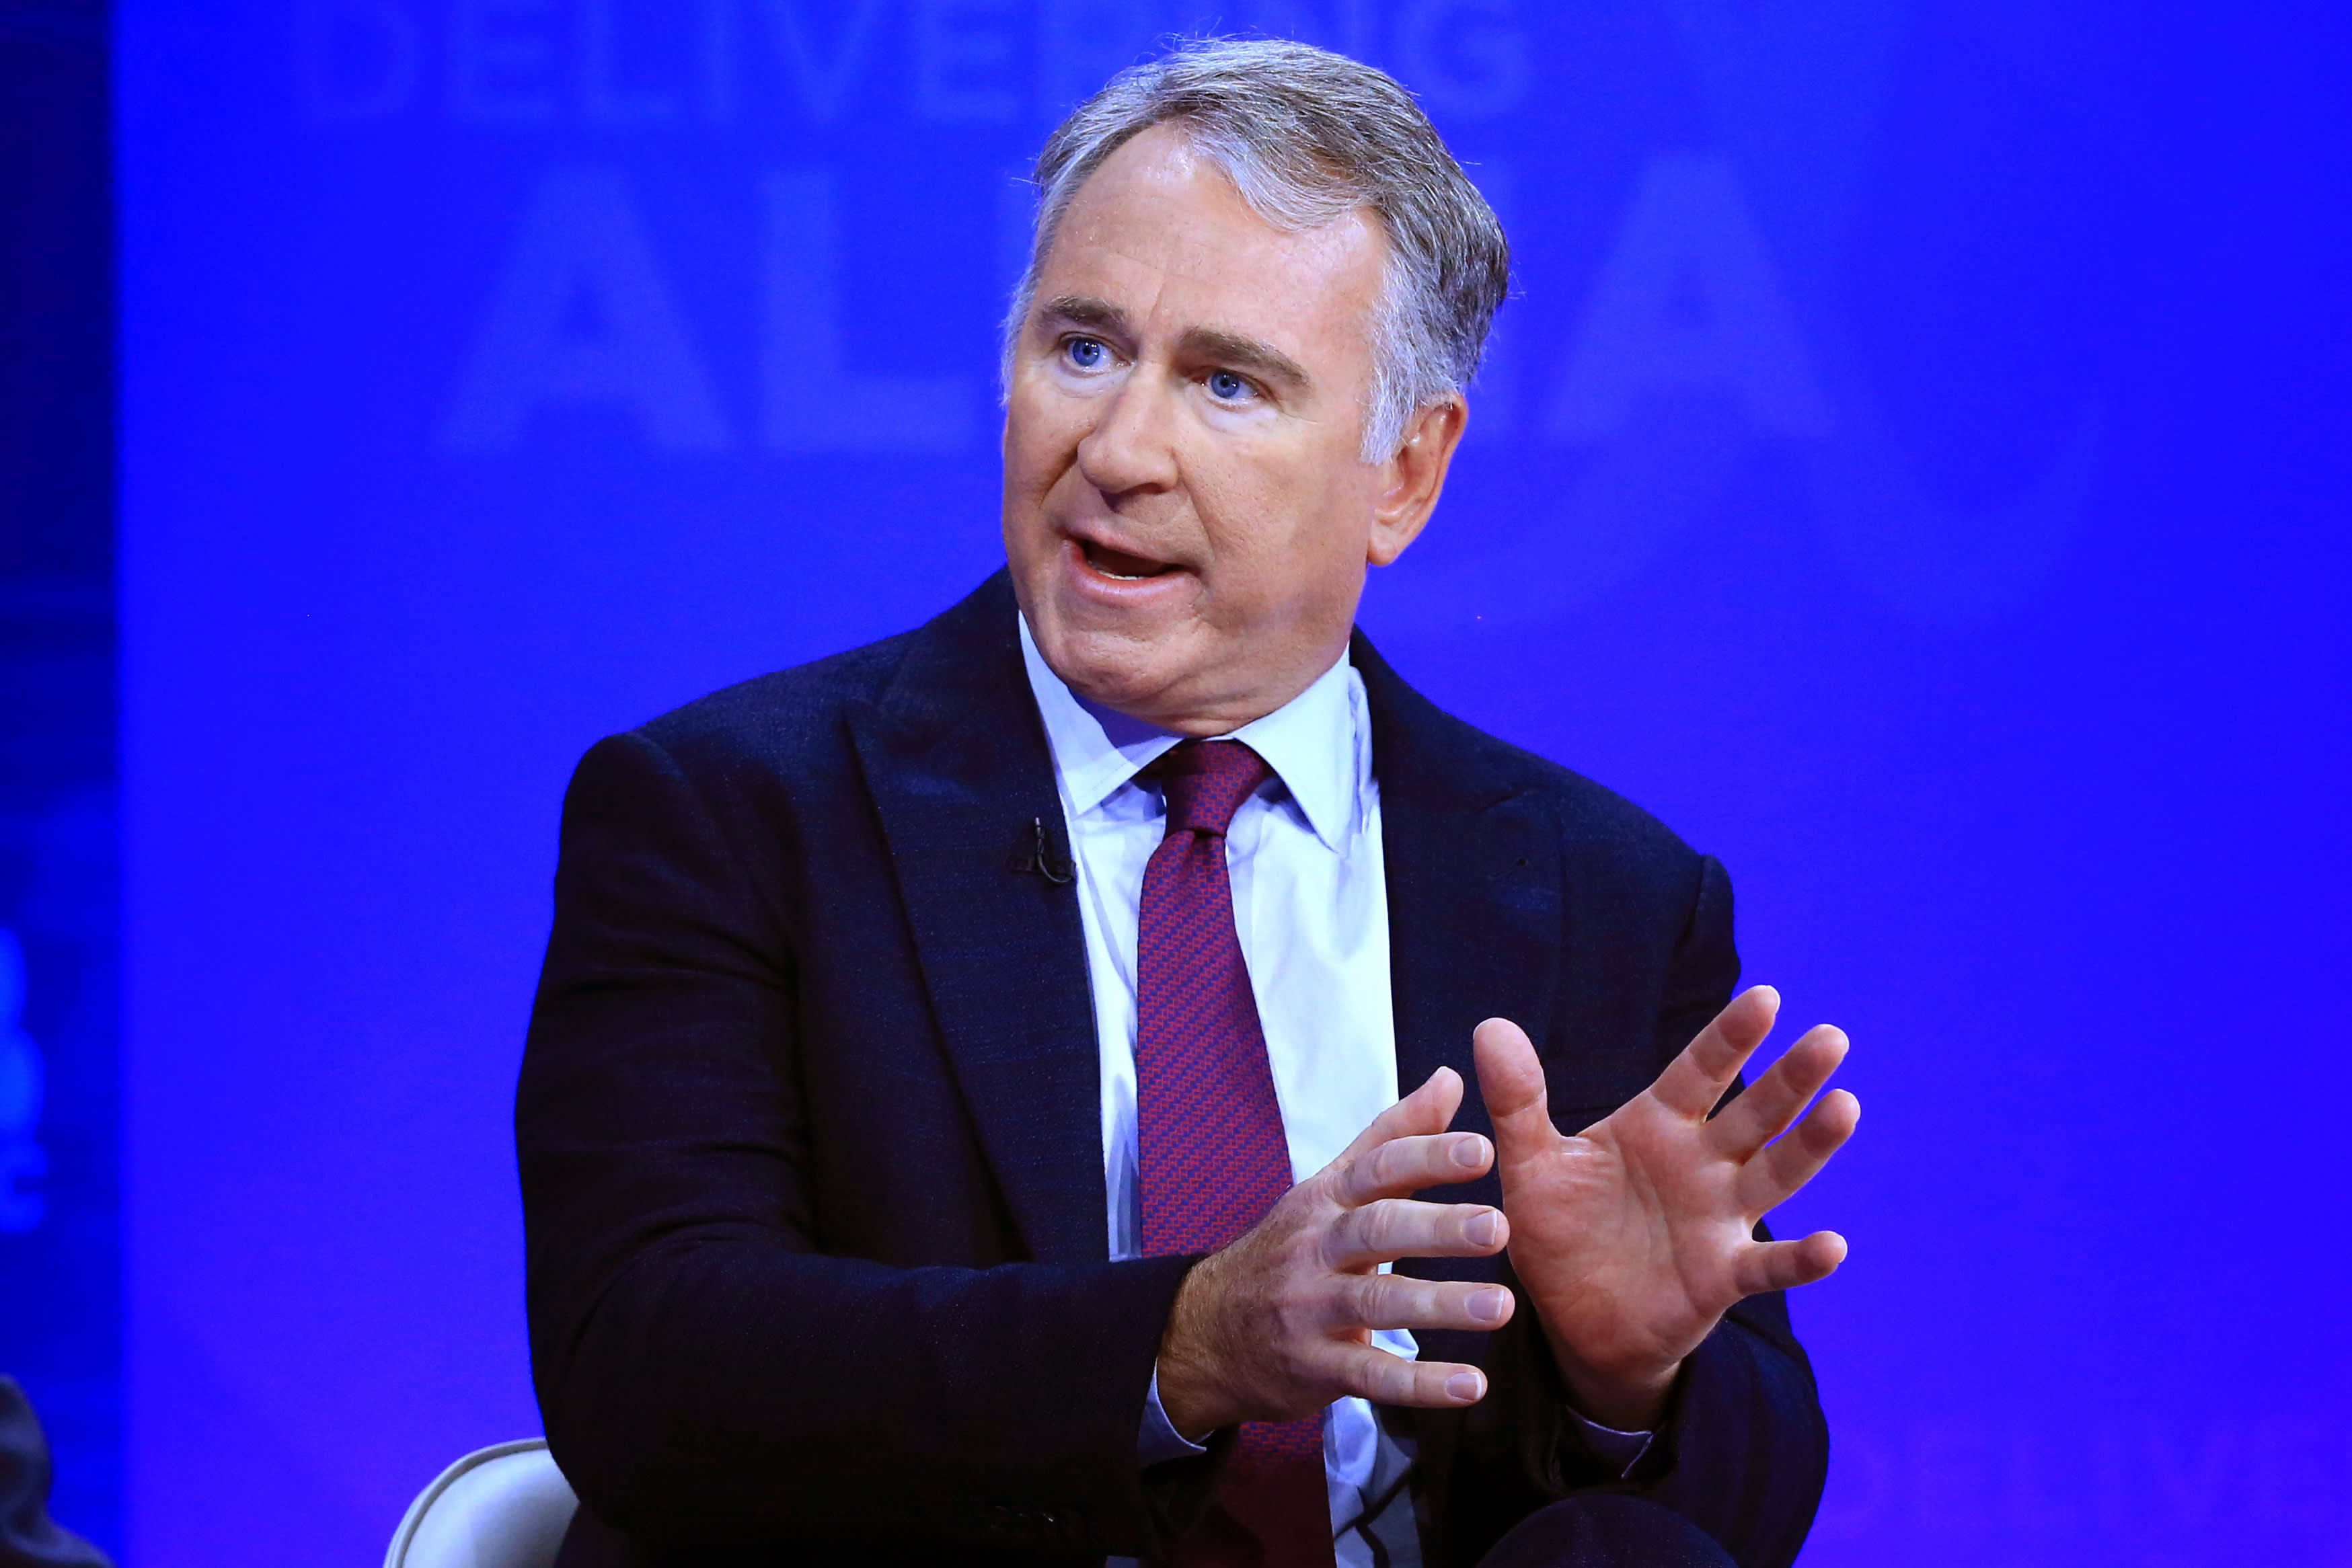 Ken Griffin's hedge fund Citadel takes 5% stake in Western Alliance Bancorp amid banking turmoil